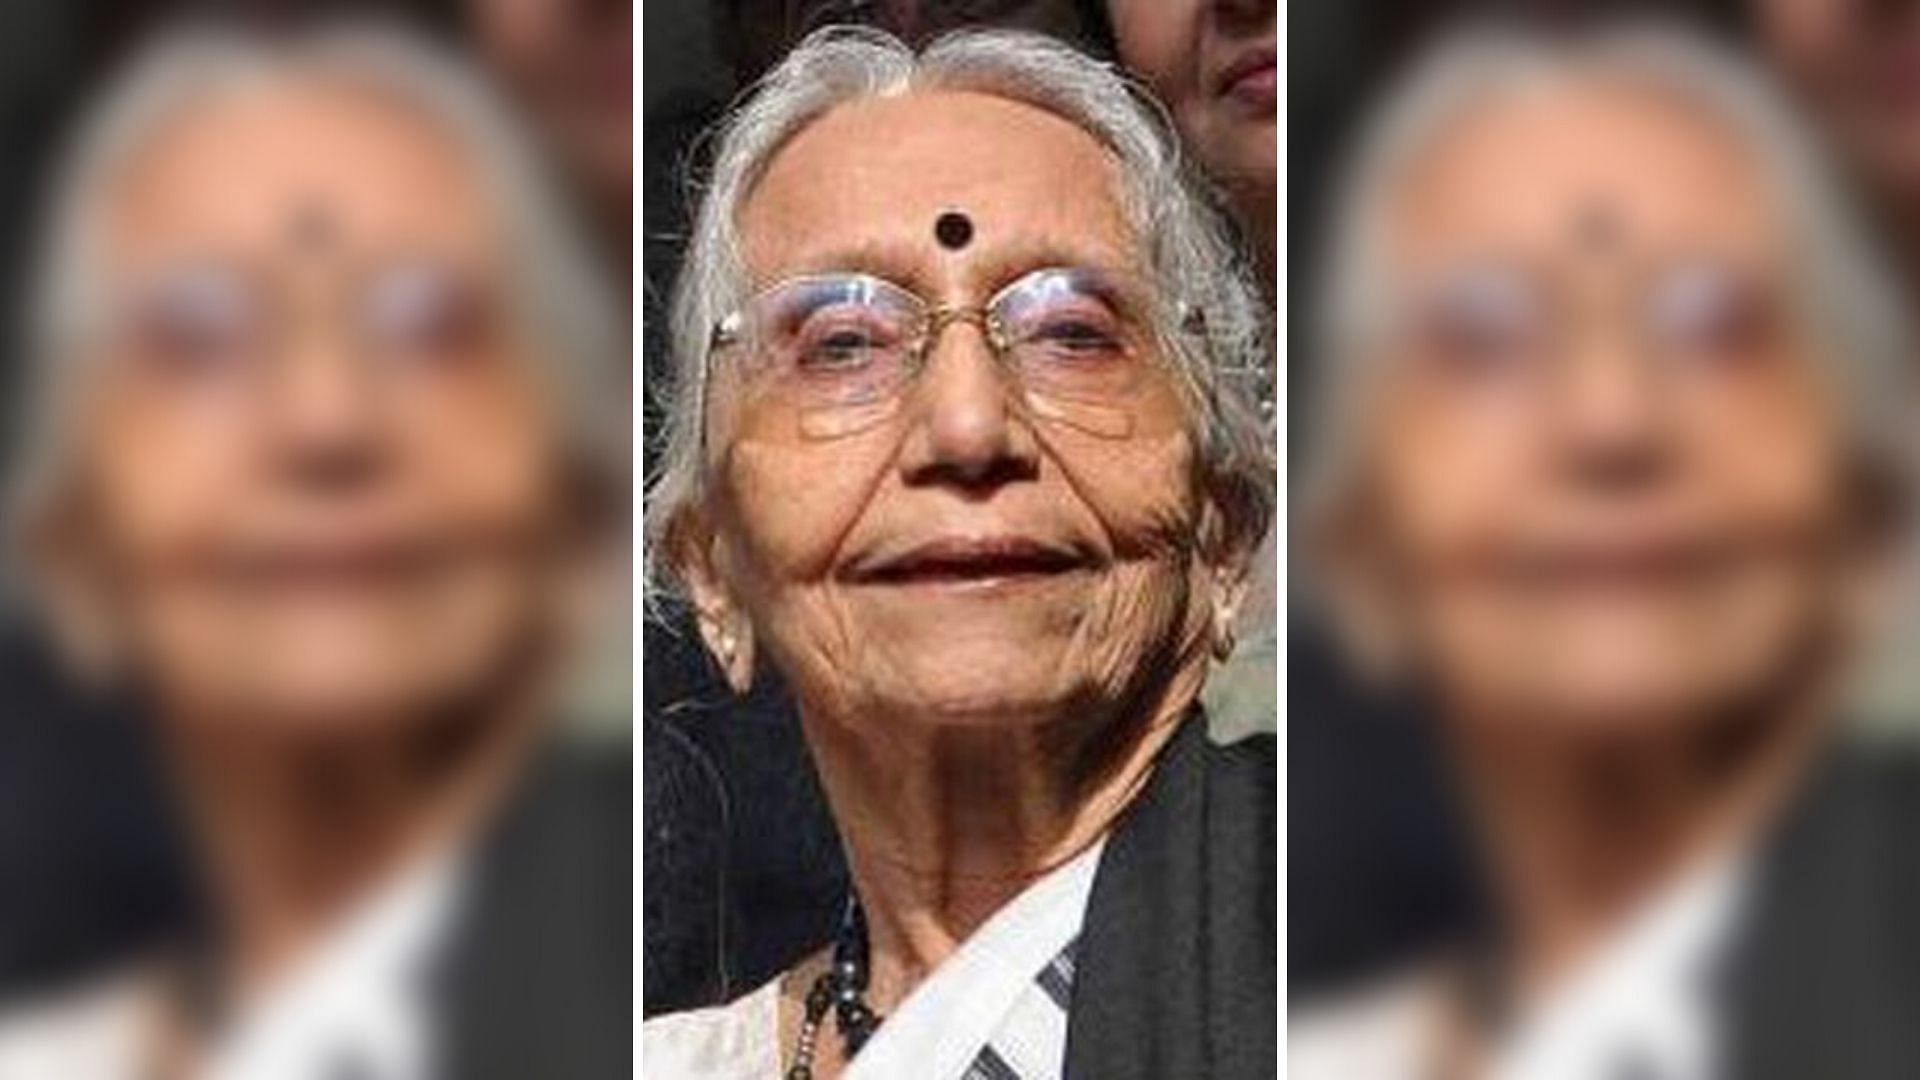 Academic-turned-politician Krishna Bose died on Saturday, 22 February, due to age-related ailments.